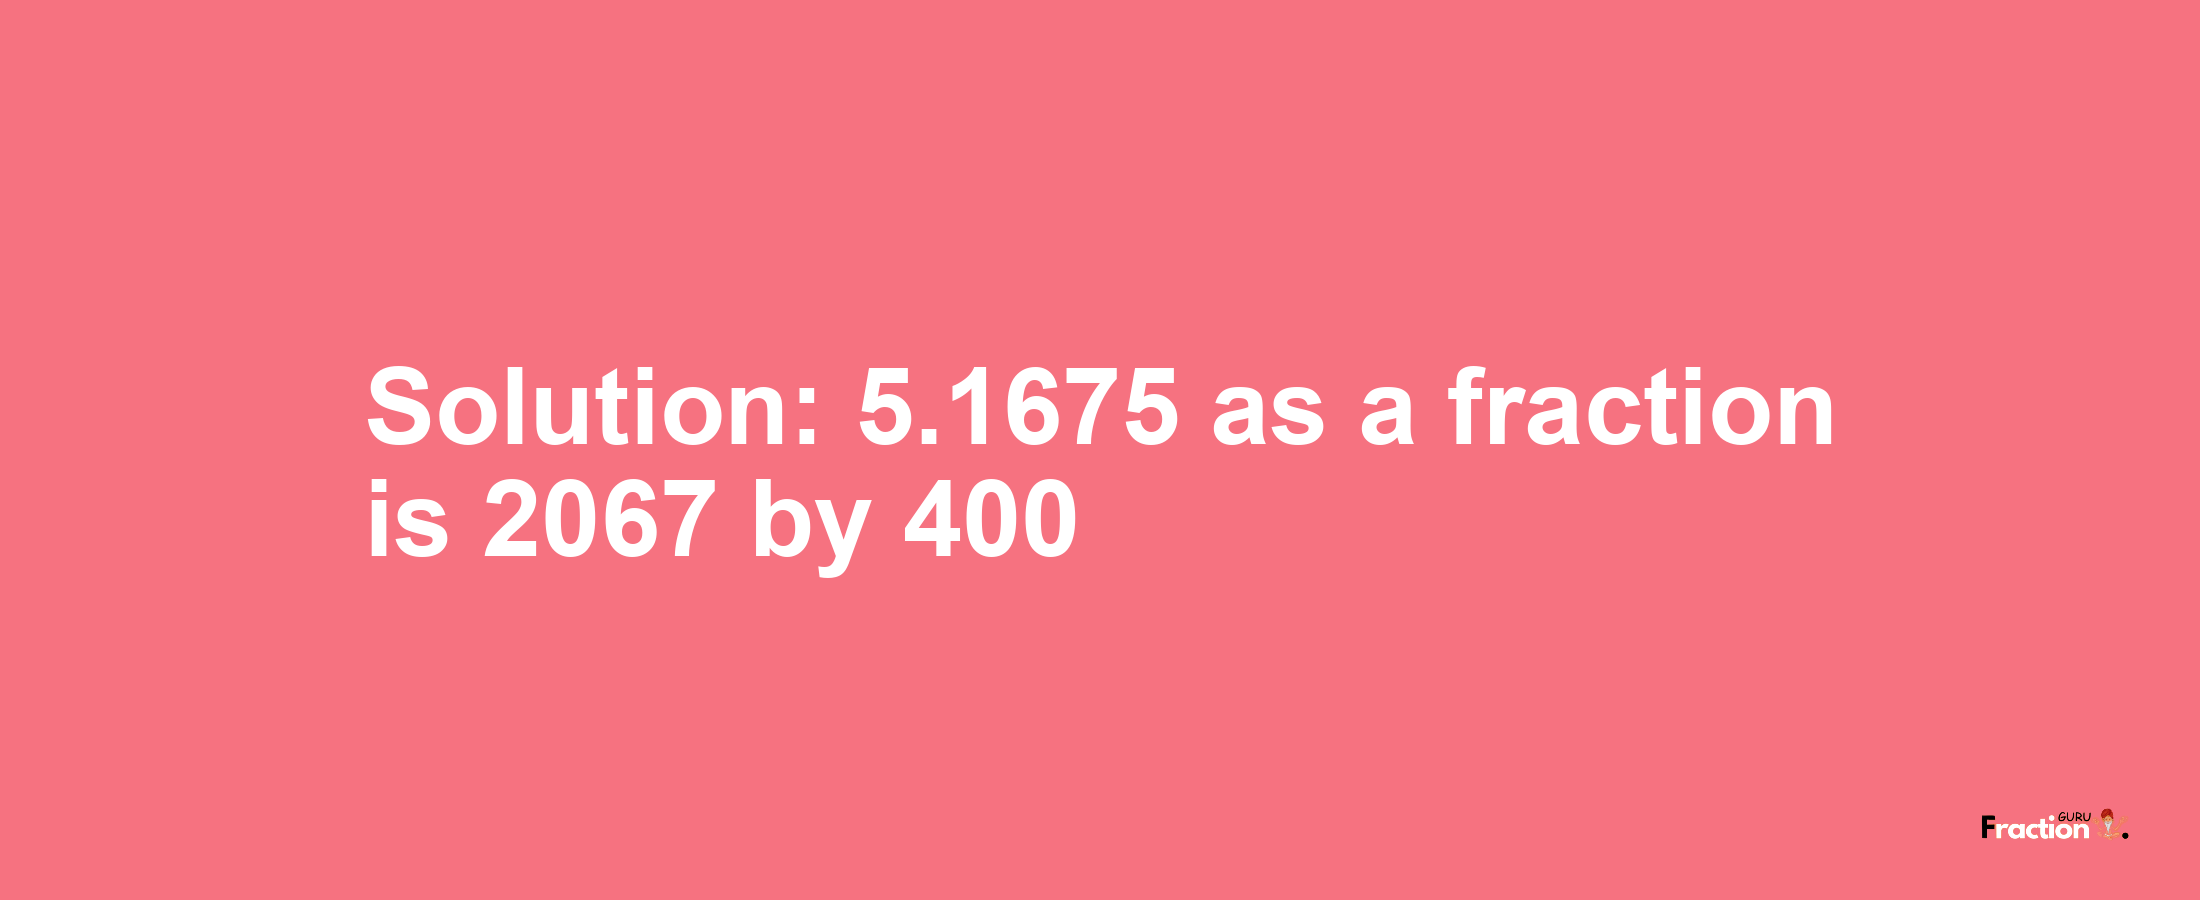 Solution:5.1675 as a fraction is 2067/400